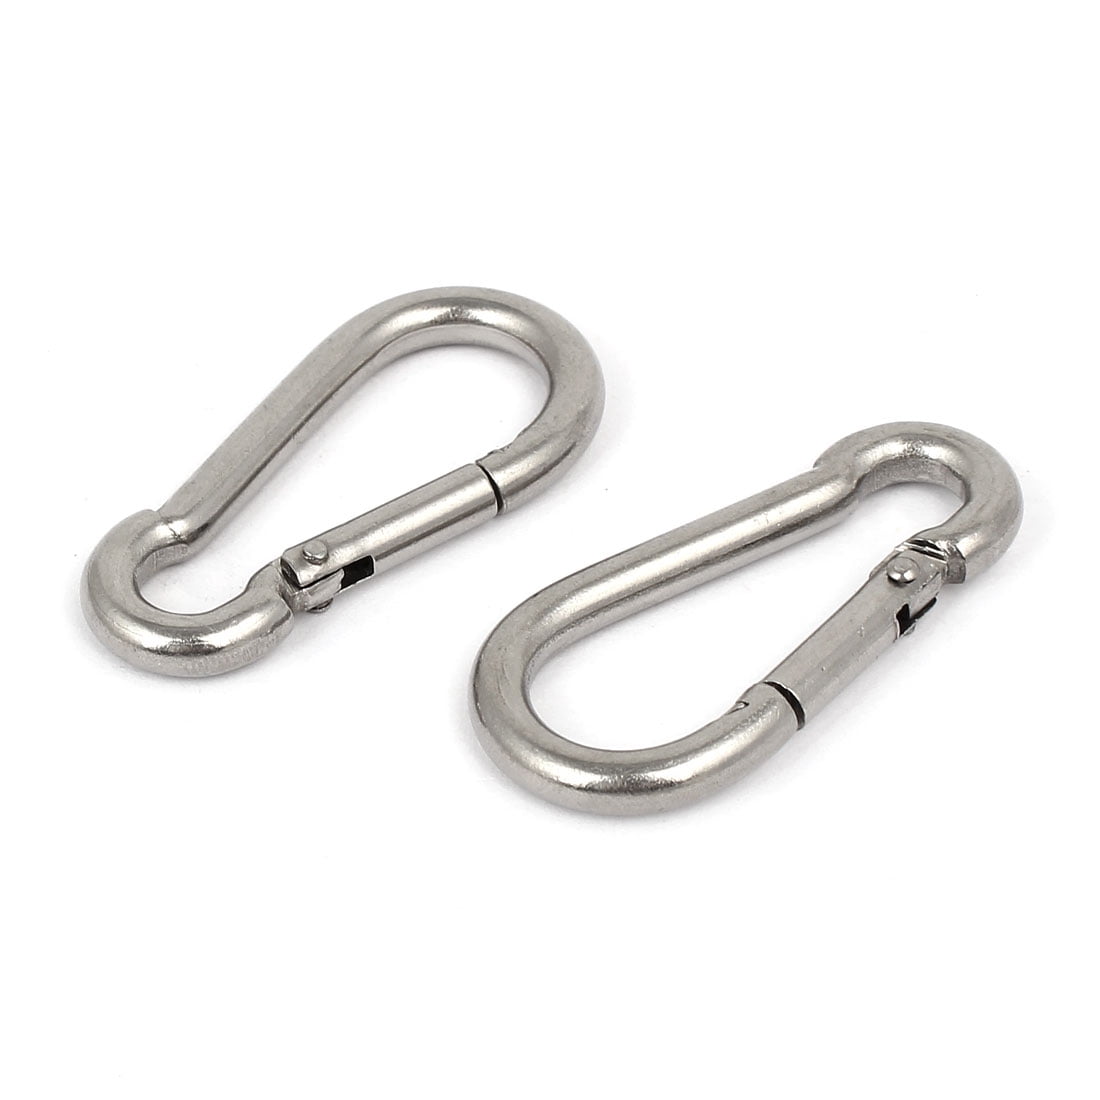 8mm STAINLESS STEEL 316 SNAP HOOK SAFETY CLIP CARABINER CLIMBING LOCK 2pcs 